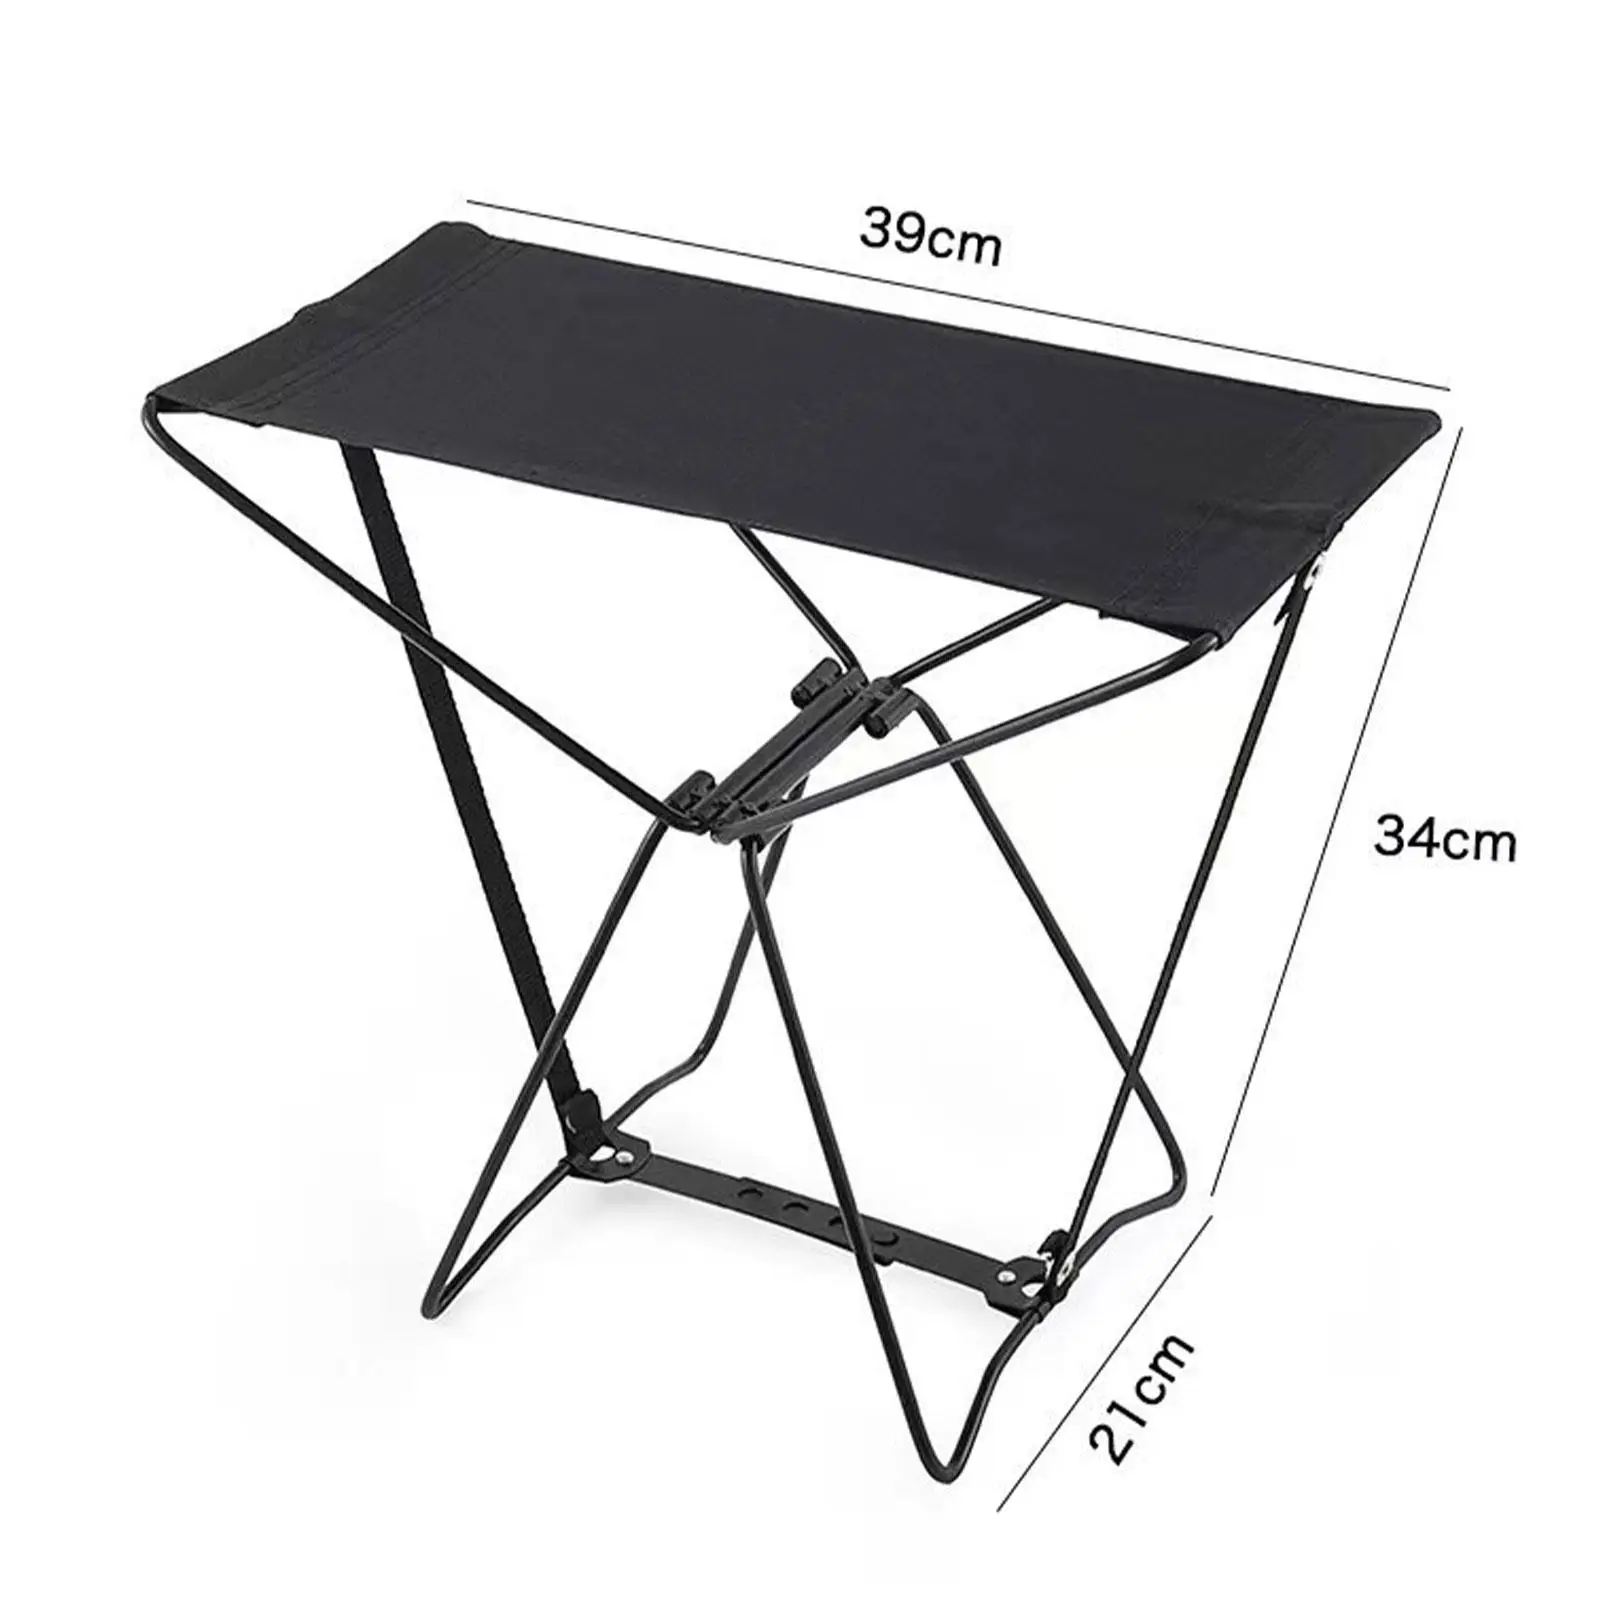 Folding Stool Foldable Footstool Collapsible Stool for Garden Picnic Yard